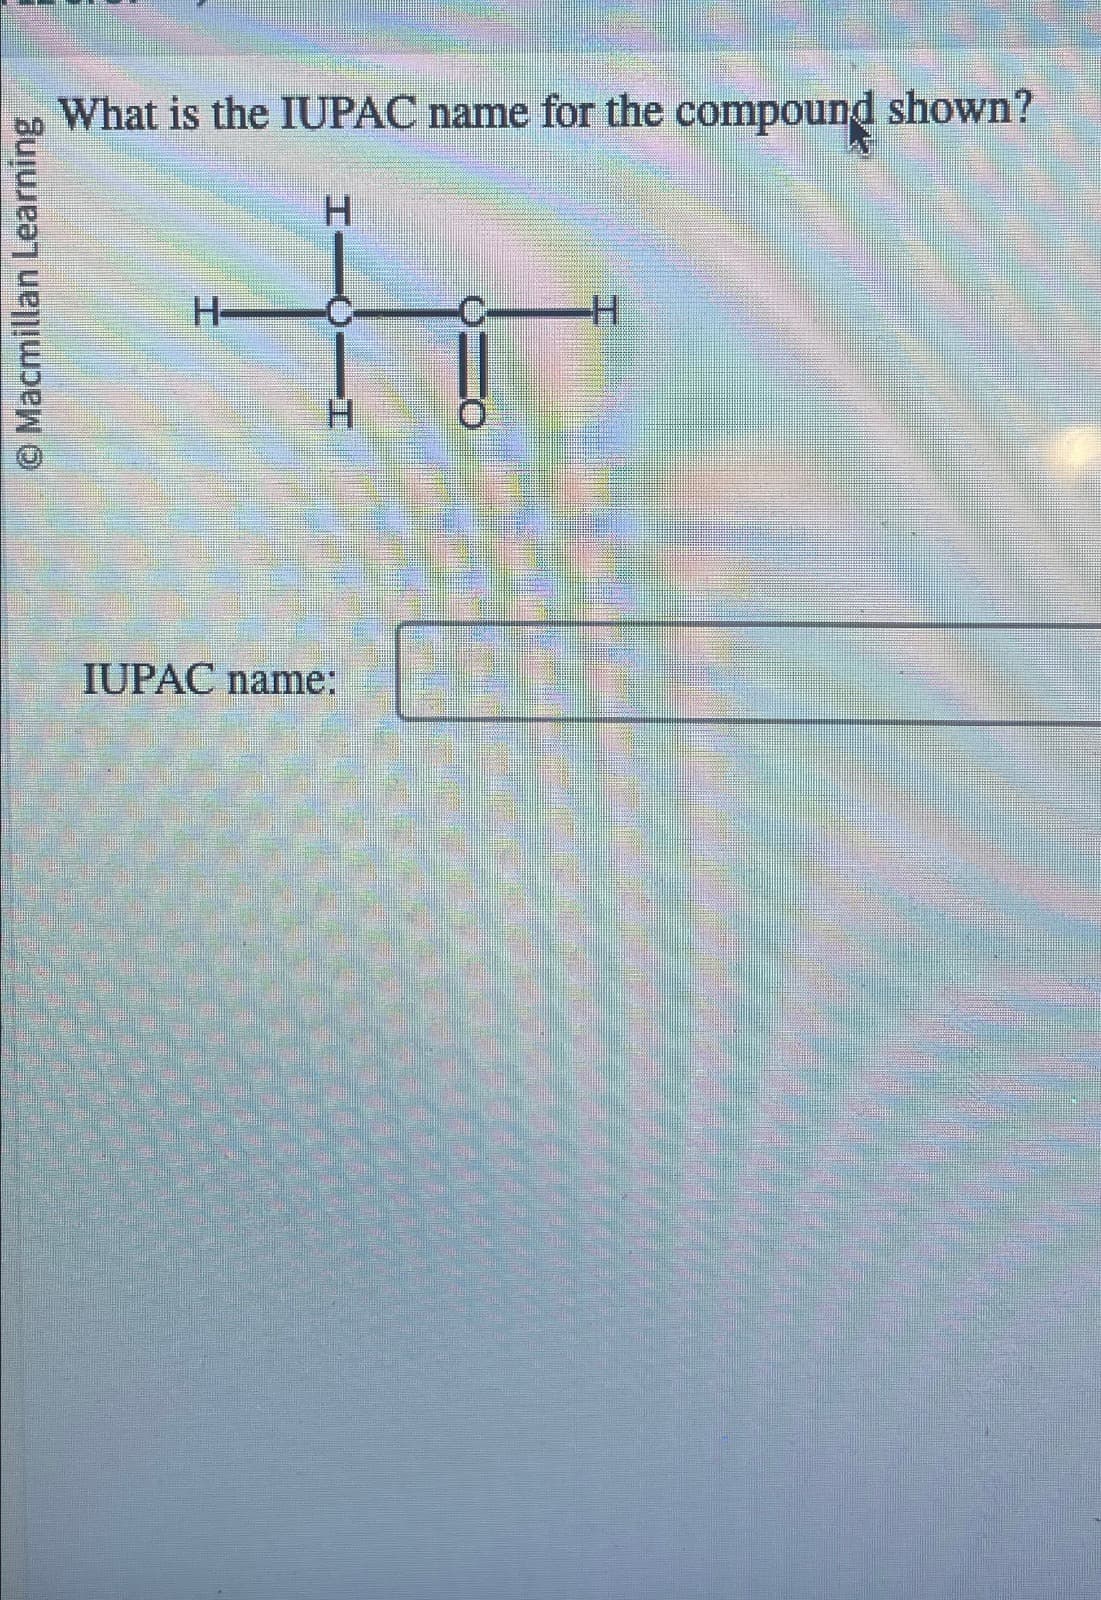 Macmillan Learning
What is the IUPAC name for the compound shown?
H
H-
+
IUPAC name:
H